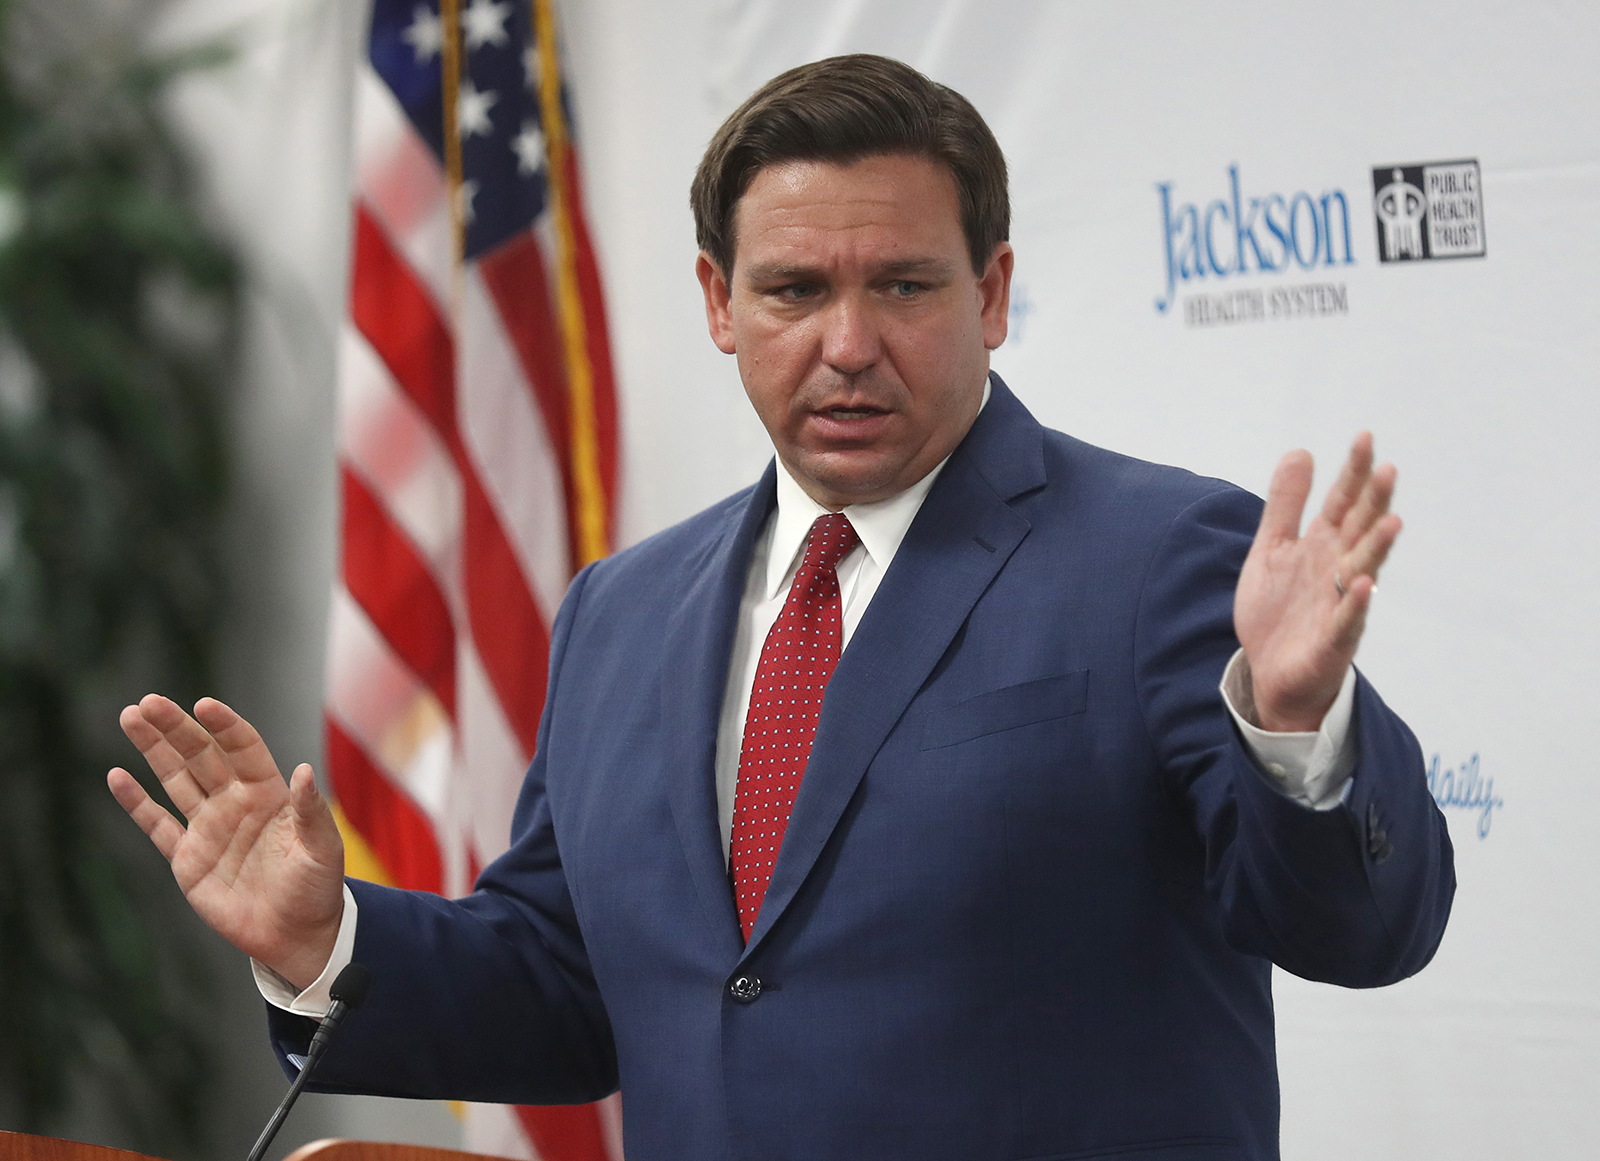 Florida Gov. Ron DeSantis speaks at a new conference on the surge in coronavirus cases in the state held at the Jackson Memorial Hospital on July 13, in Miami, Florida. 